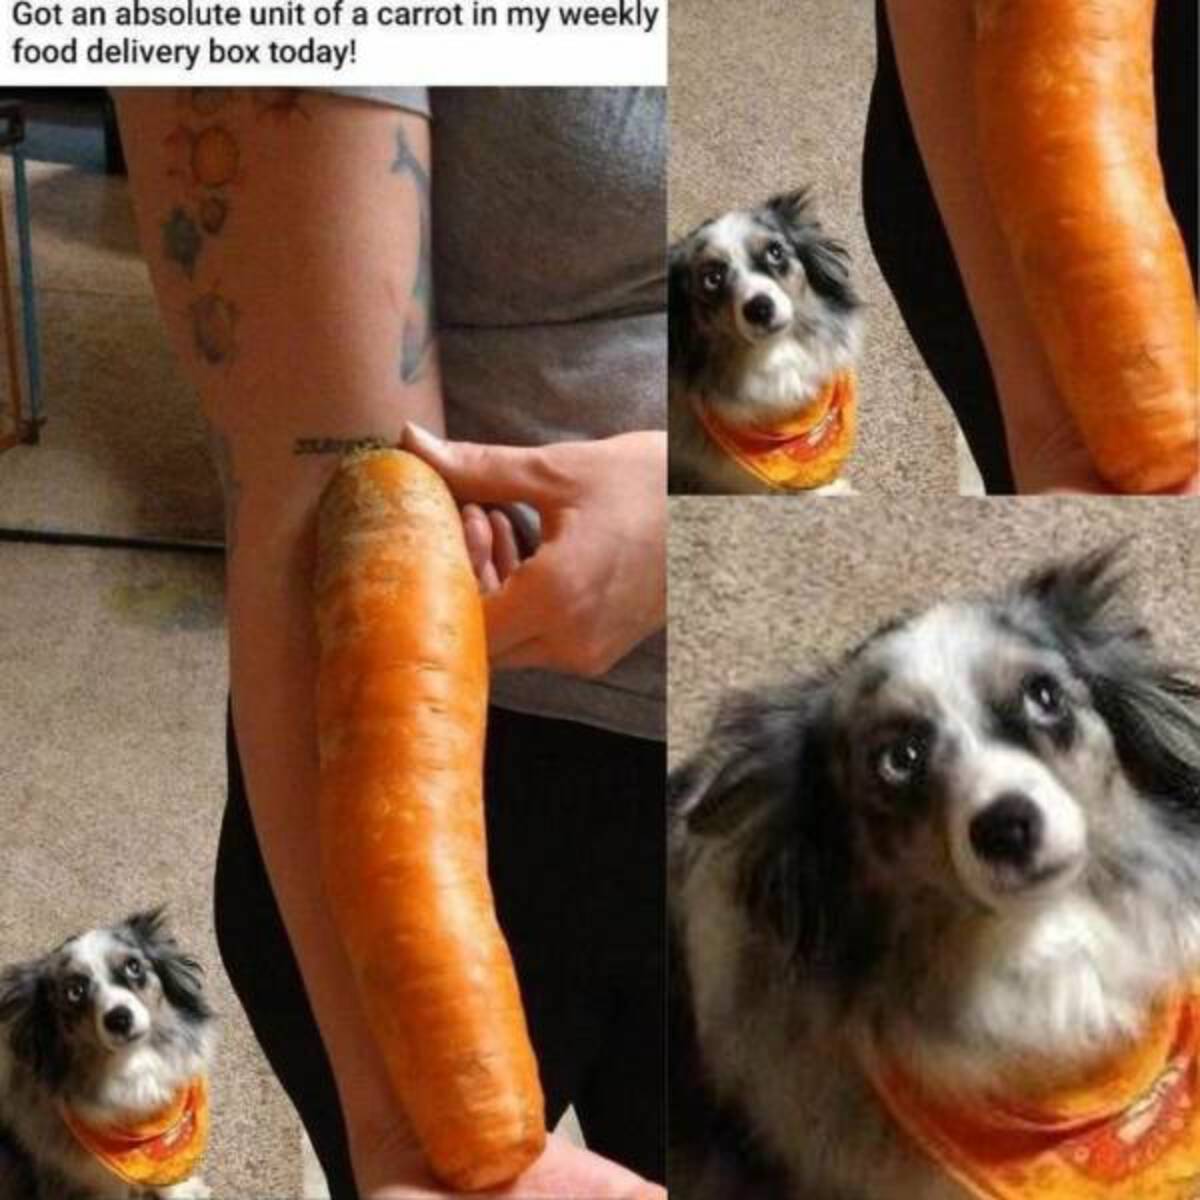 cool random pics - snout - Got an absolute unit of a carrot in my weekly food delivery box today!